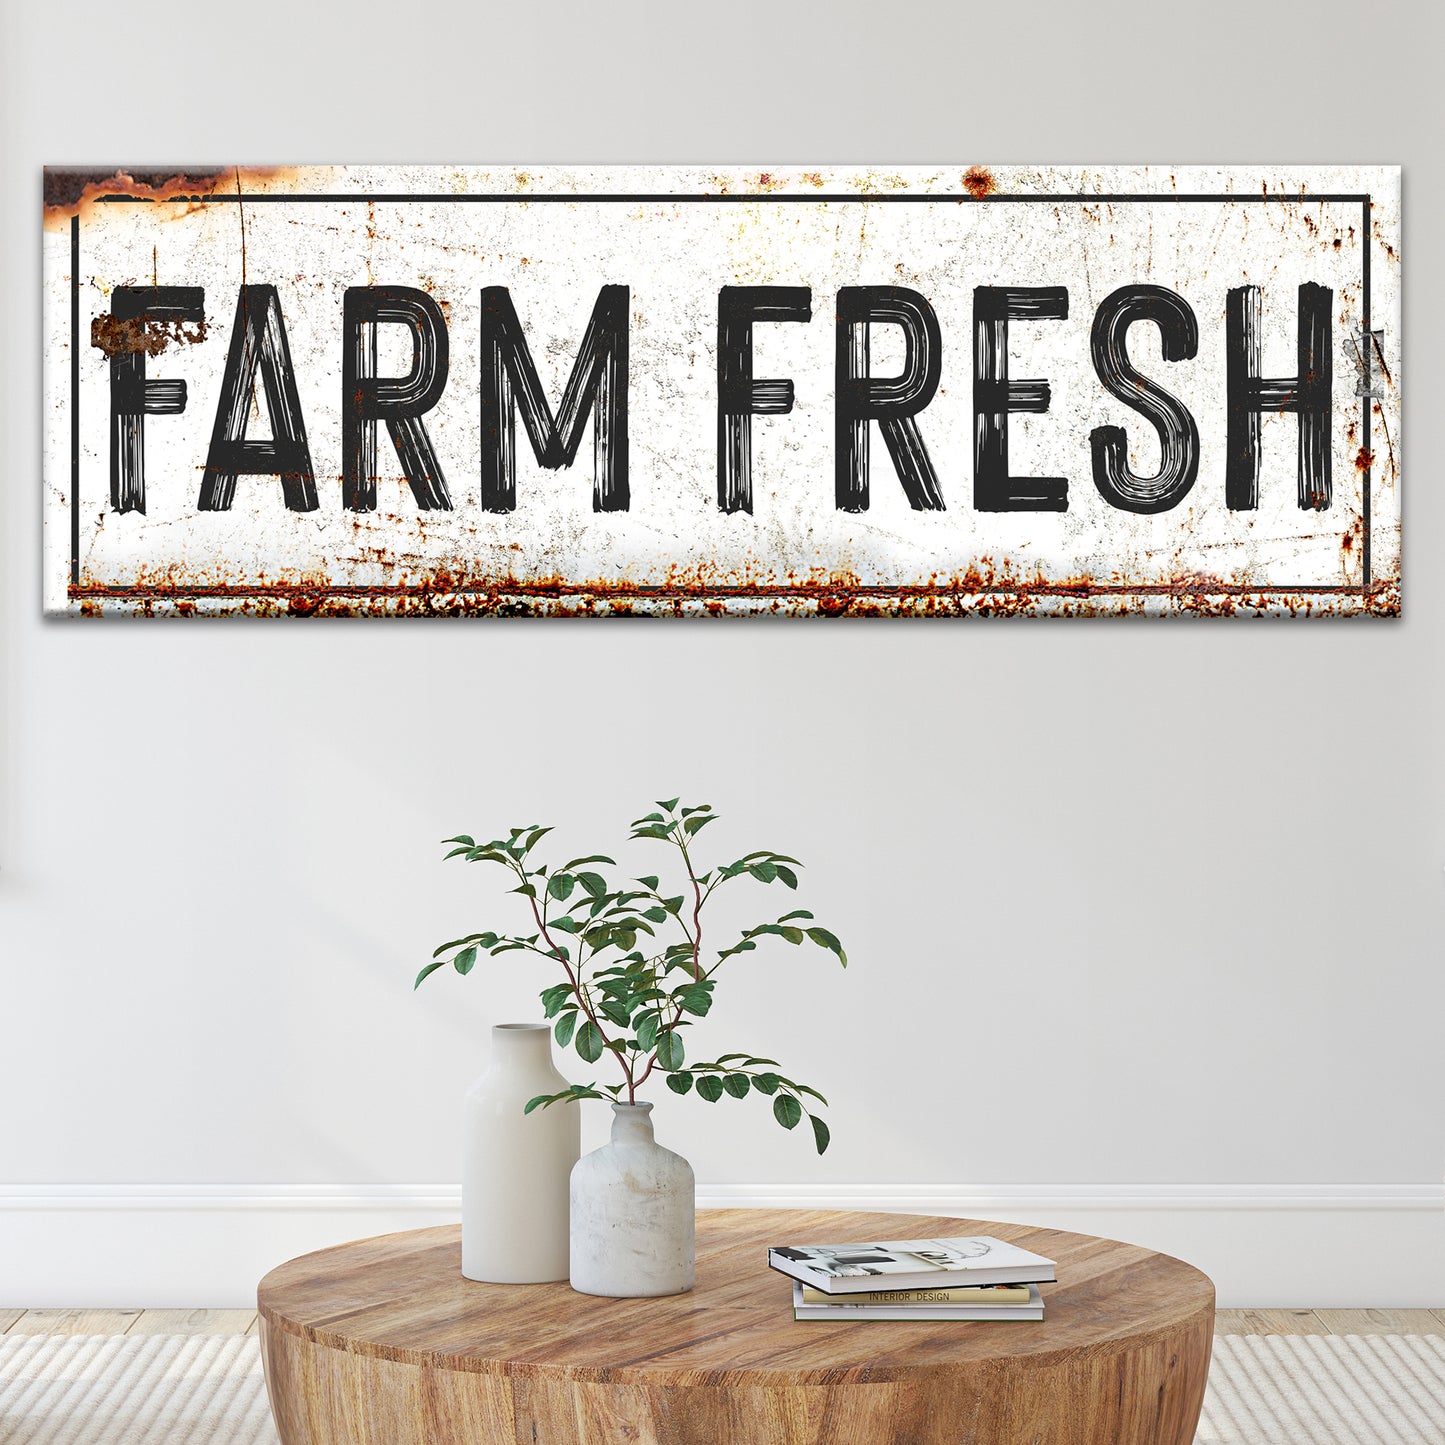 Farm Fresh Sign - Image by Tailored Canvases